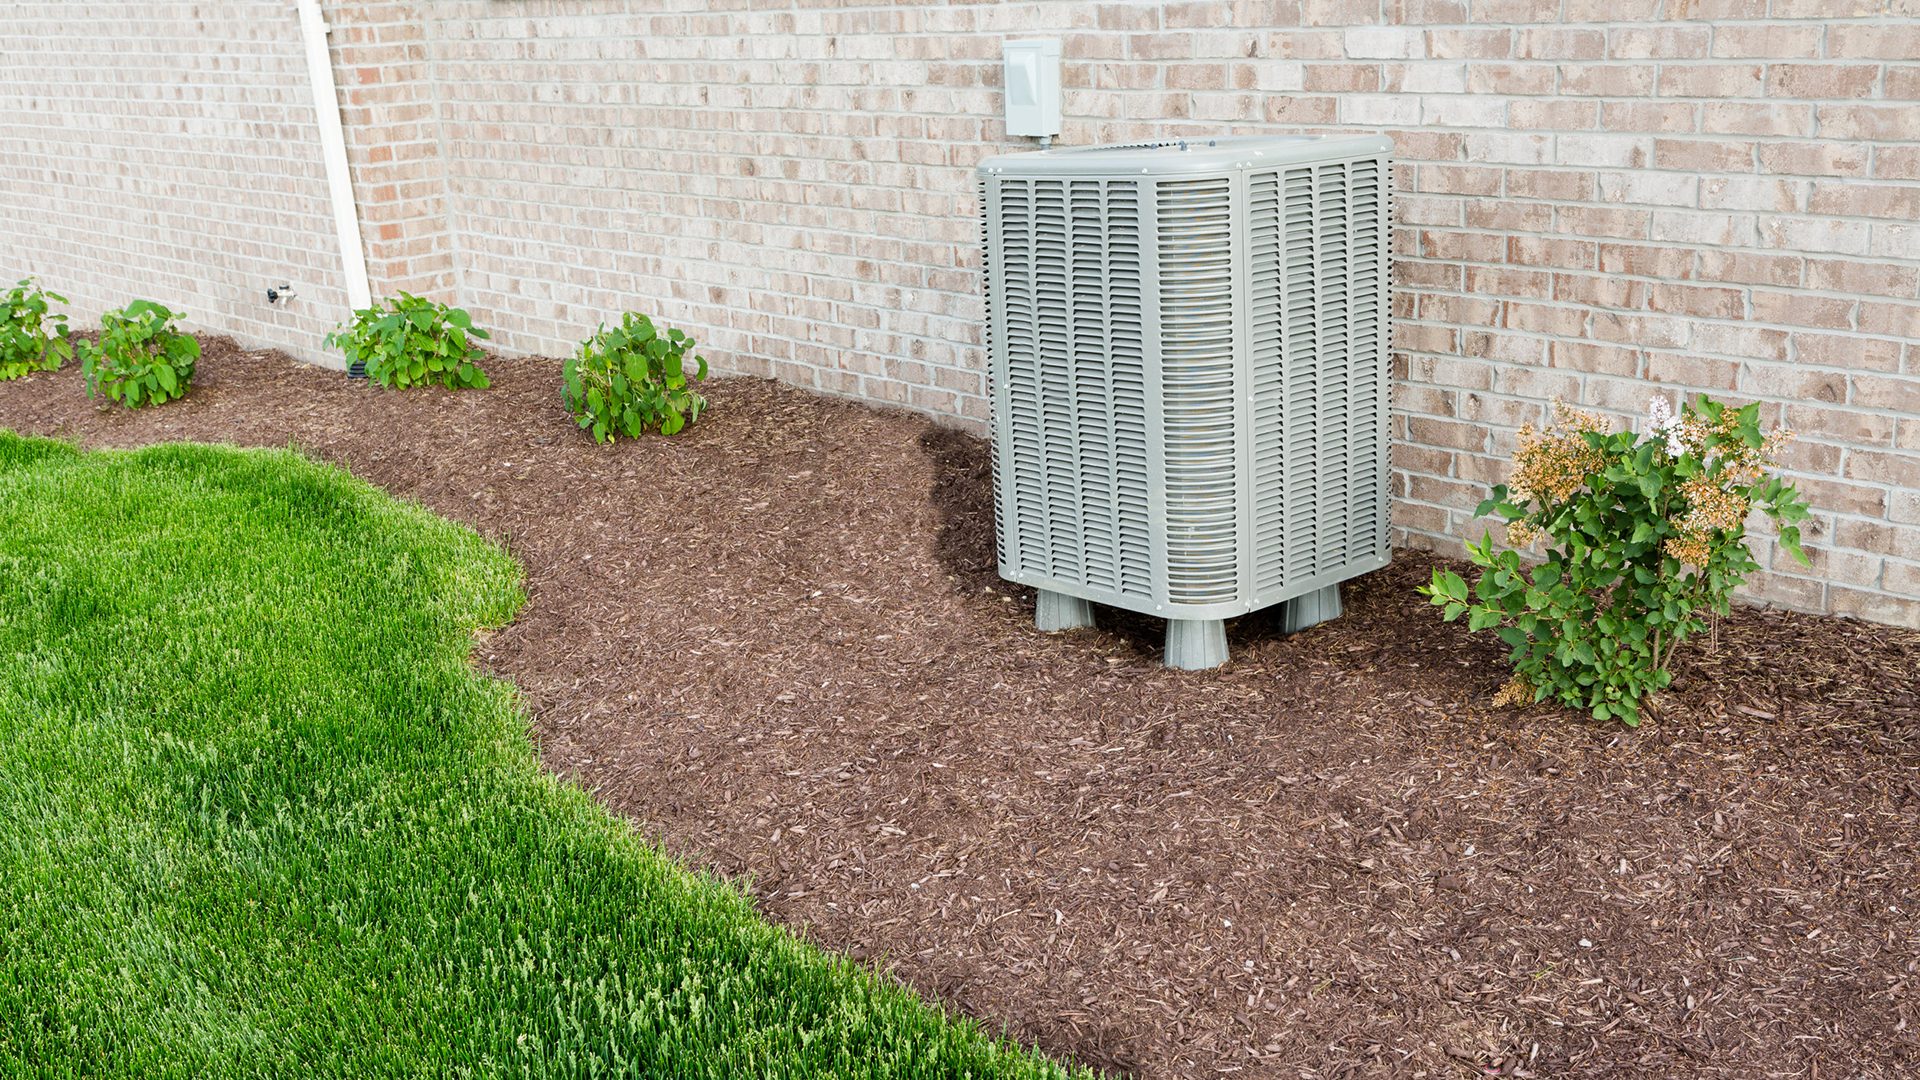 Air conditioner condenser unit standing outdoors in a garden in a neat clean mulched flowerbed for easy access for maintenance